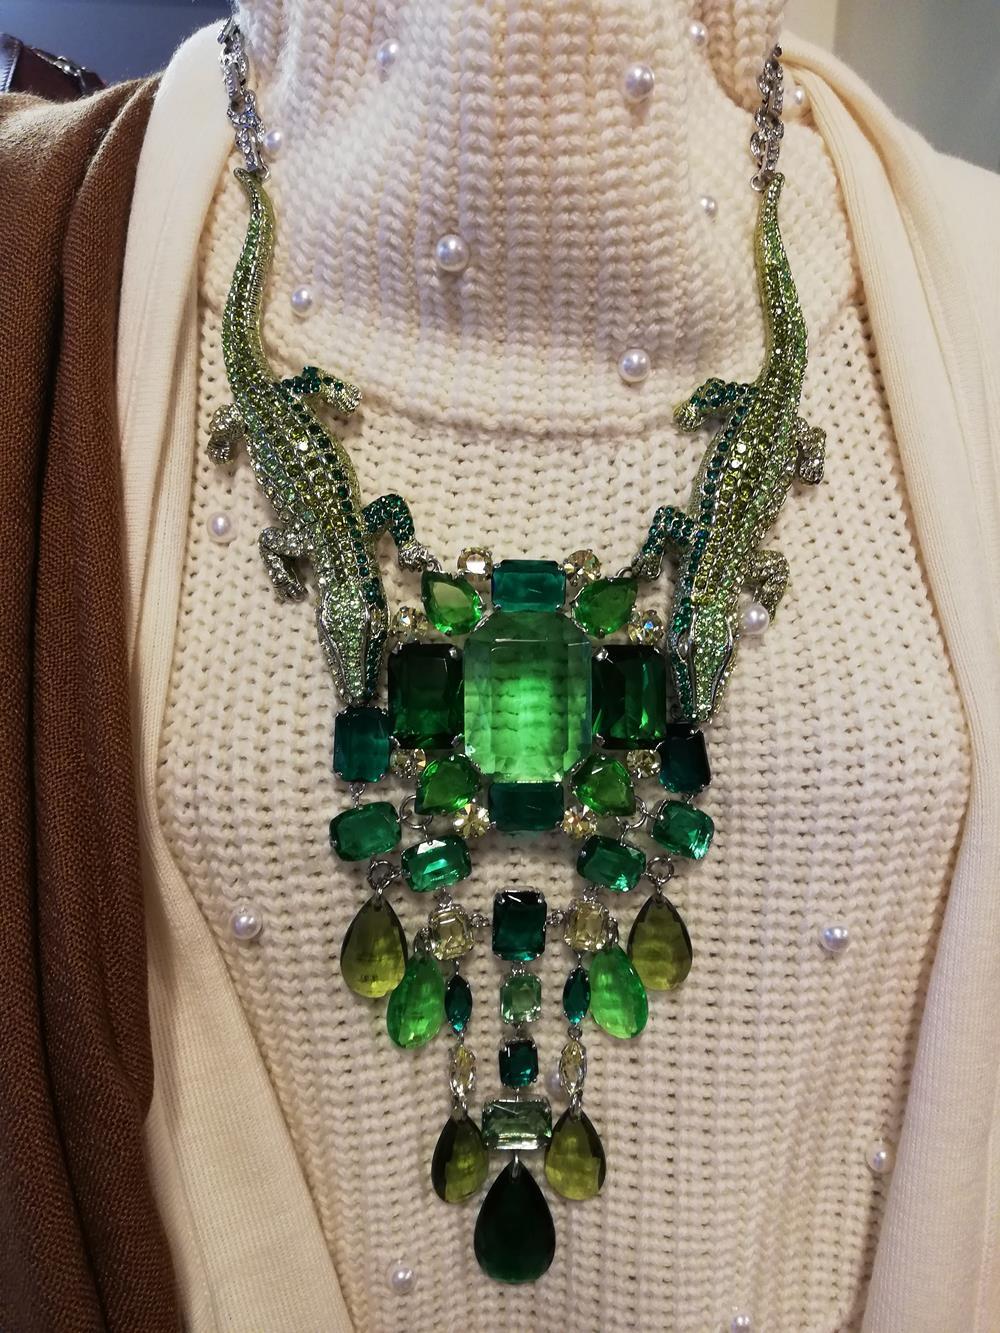 Fantastic piece by Carlo Zini
One of the world greatest bijoux designers
Non allergenic rhodium
Crocodiles theme, green peridot color with emerald and olive shades
Amazing hand application of swarovski crystals
100% Artisanal work
Made in